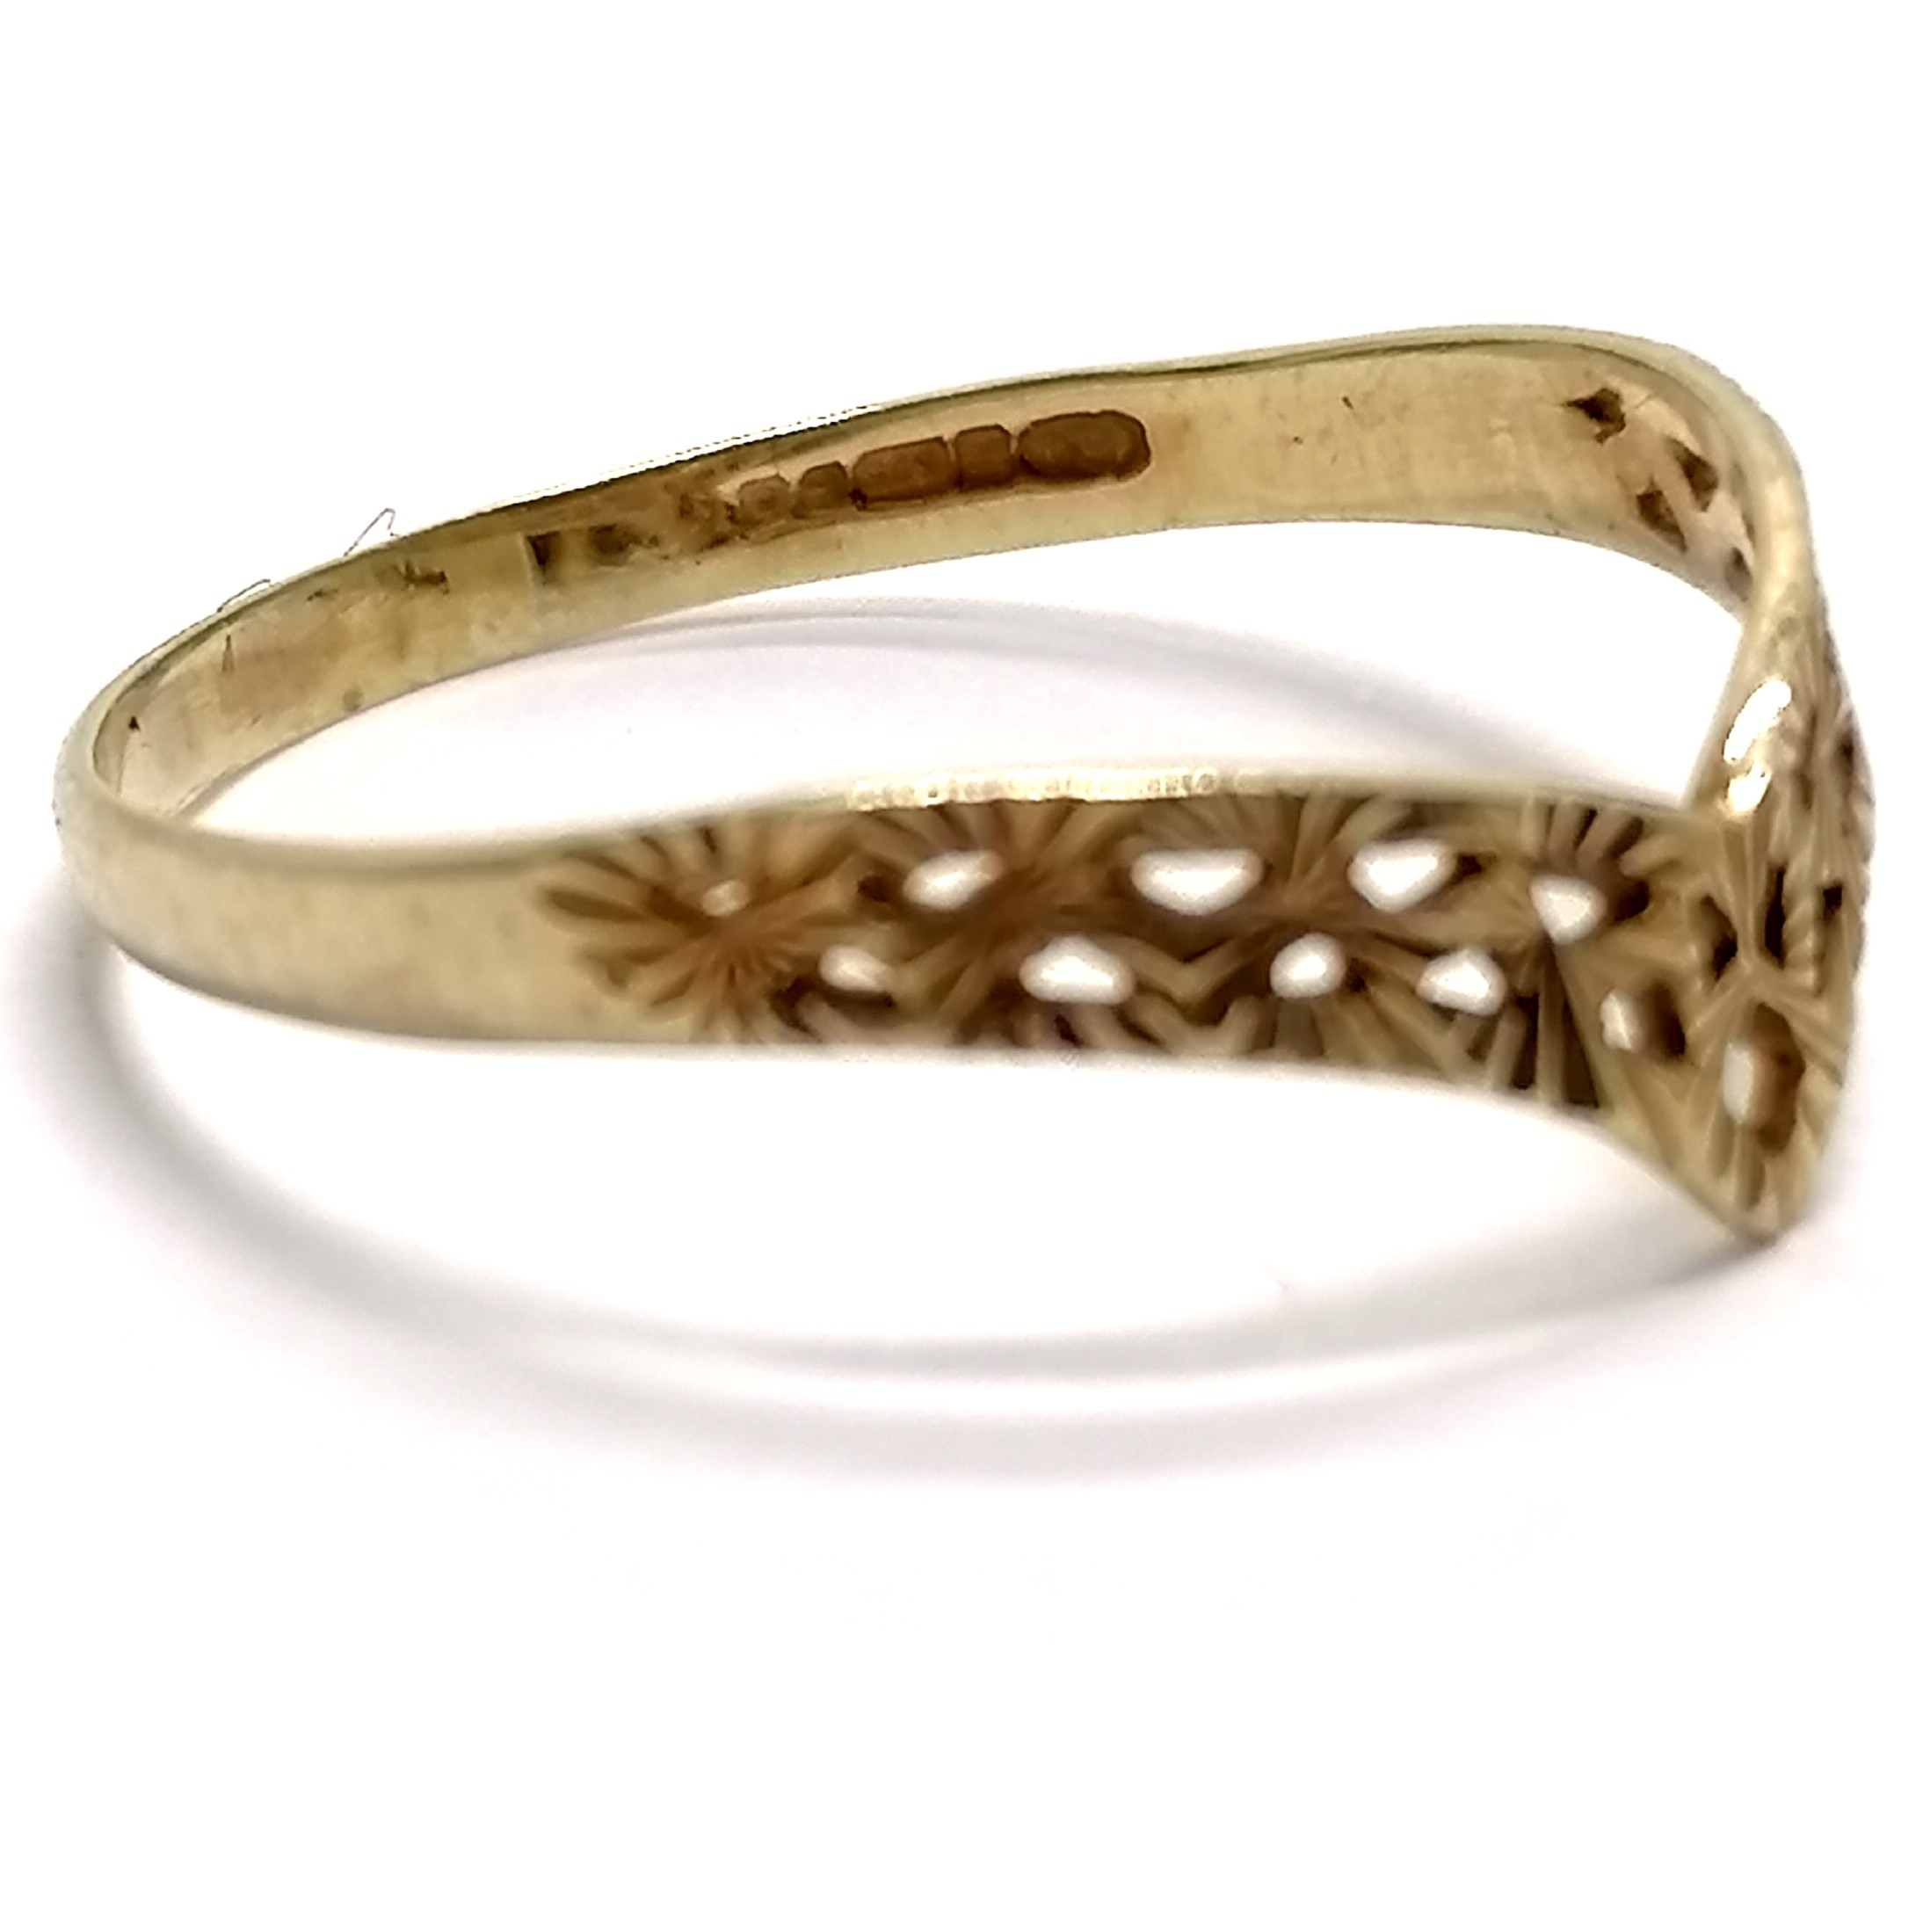 9ct hallmarked gold wishbone ring - size Q & 0.8g - SOLD ON BEHALF OF THE NEW BREAST CANCER UNIT - Image 2 of 2